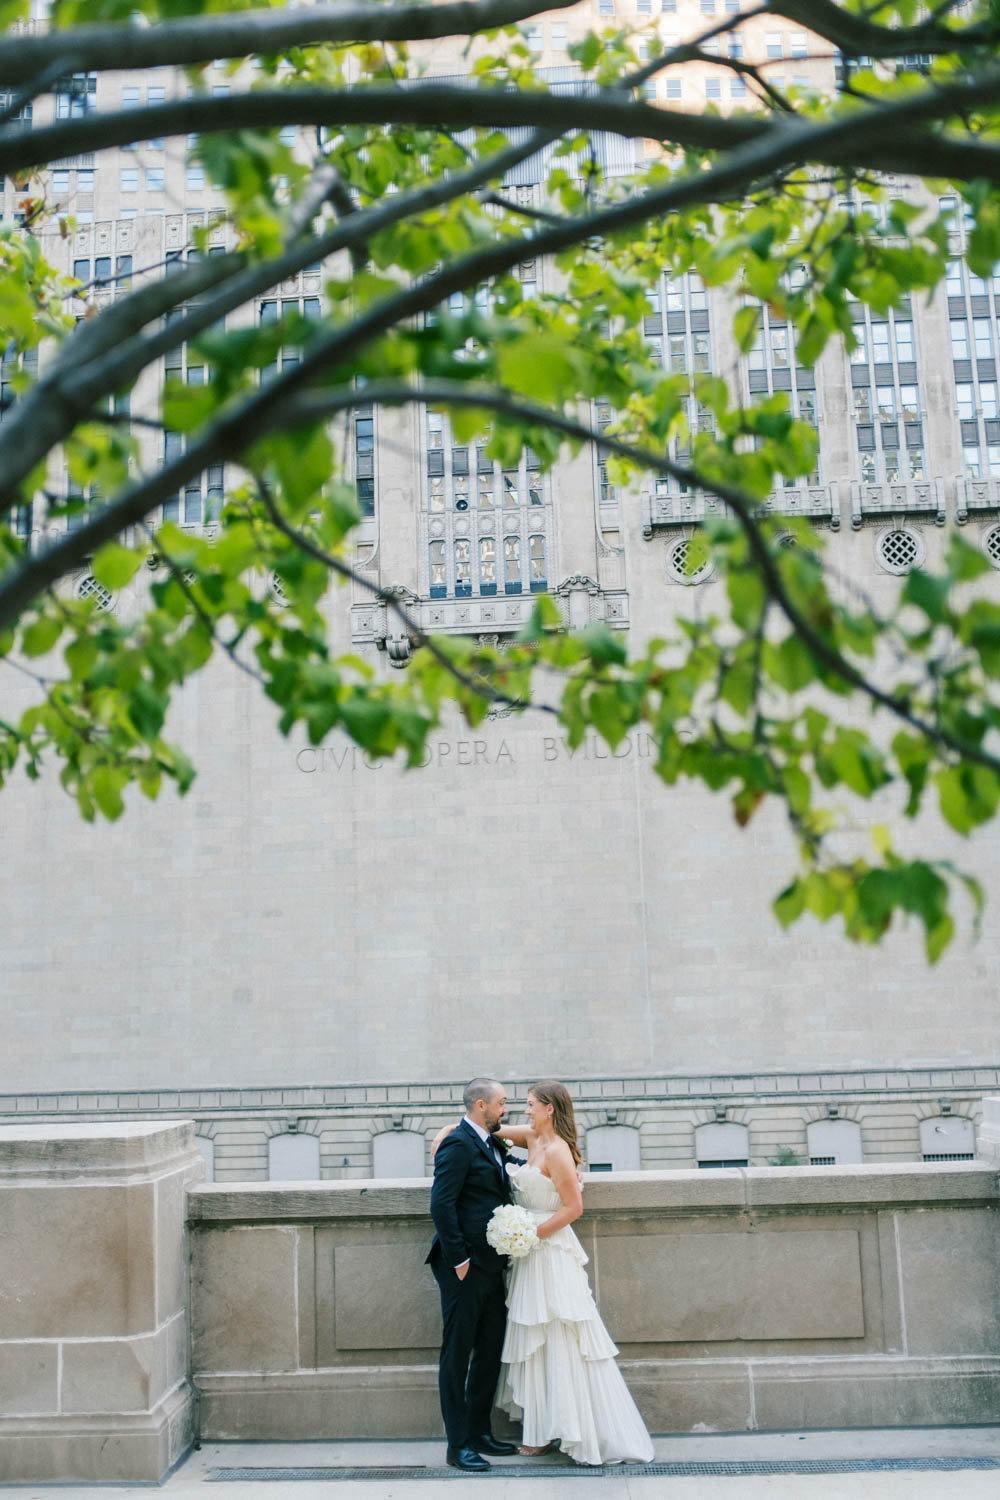 A wedding portrait with mix of greenery and city in downtown Chicago